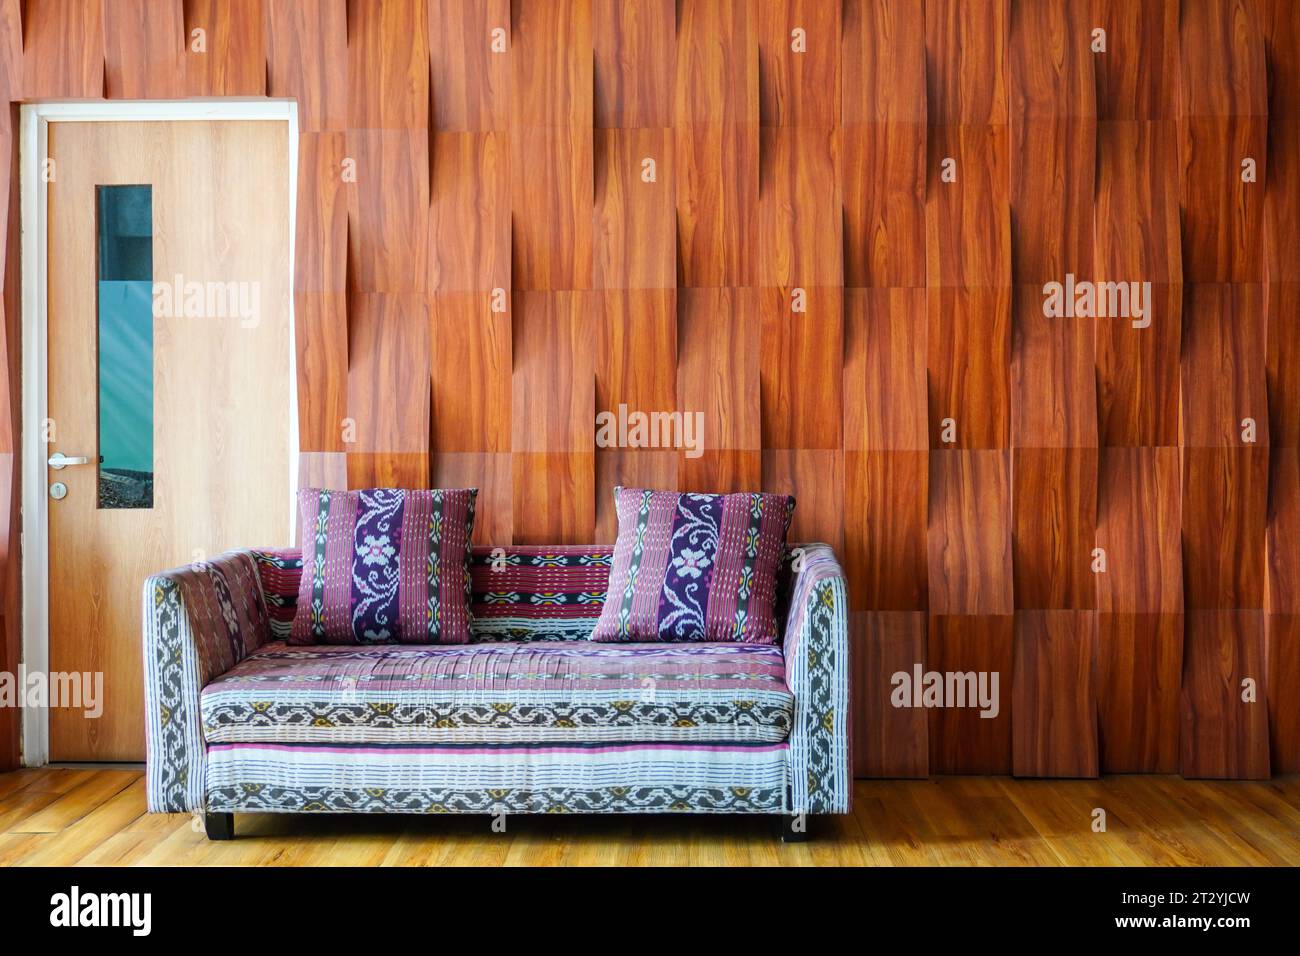 Batik motif cozy sofa by the door with a backdrop of textured wooden wall ornaments Stock Photo